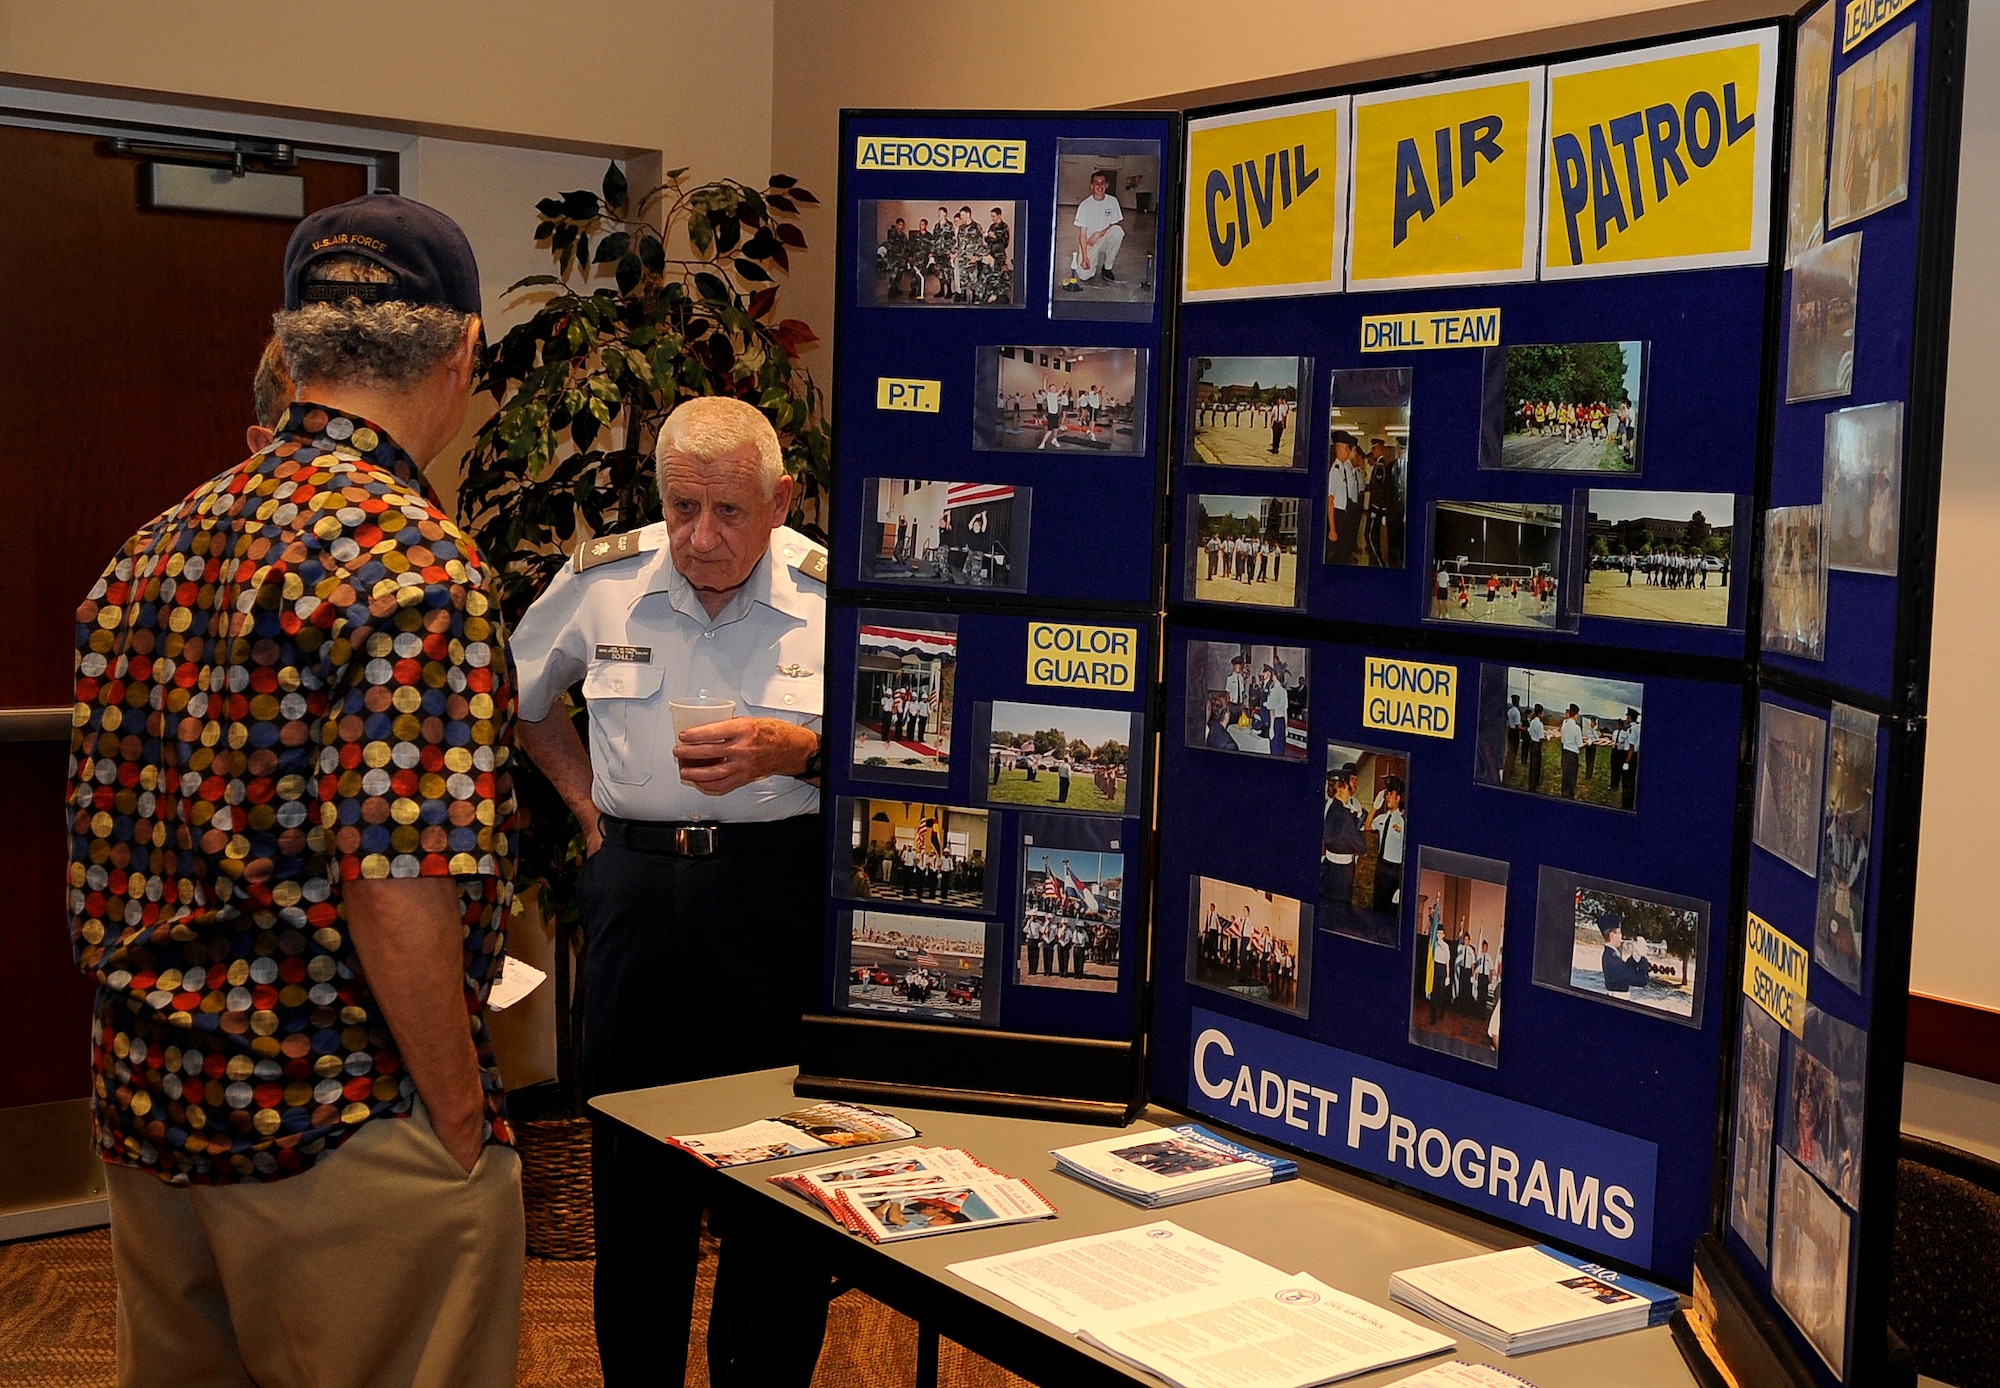 BUCKLEY AIR FORCE BASE, Colo. - Colorado's retirees and veterans were invited to Buckley Air Force Base's annual Retiree Appreciation Day at the Leadership Development Center June 18. More than 30 organizations gathered in support of the retirees, including the Civil Air Patrol. (U.S. Air Force photo by Senior Airman Steve Czyz)